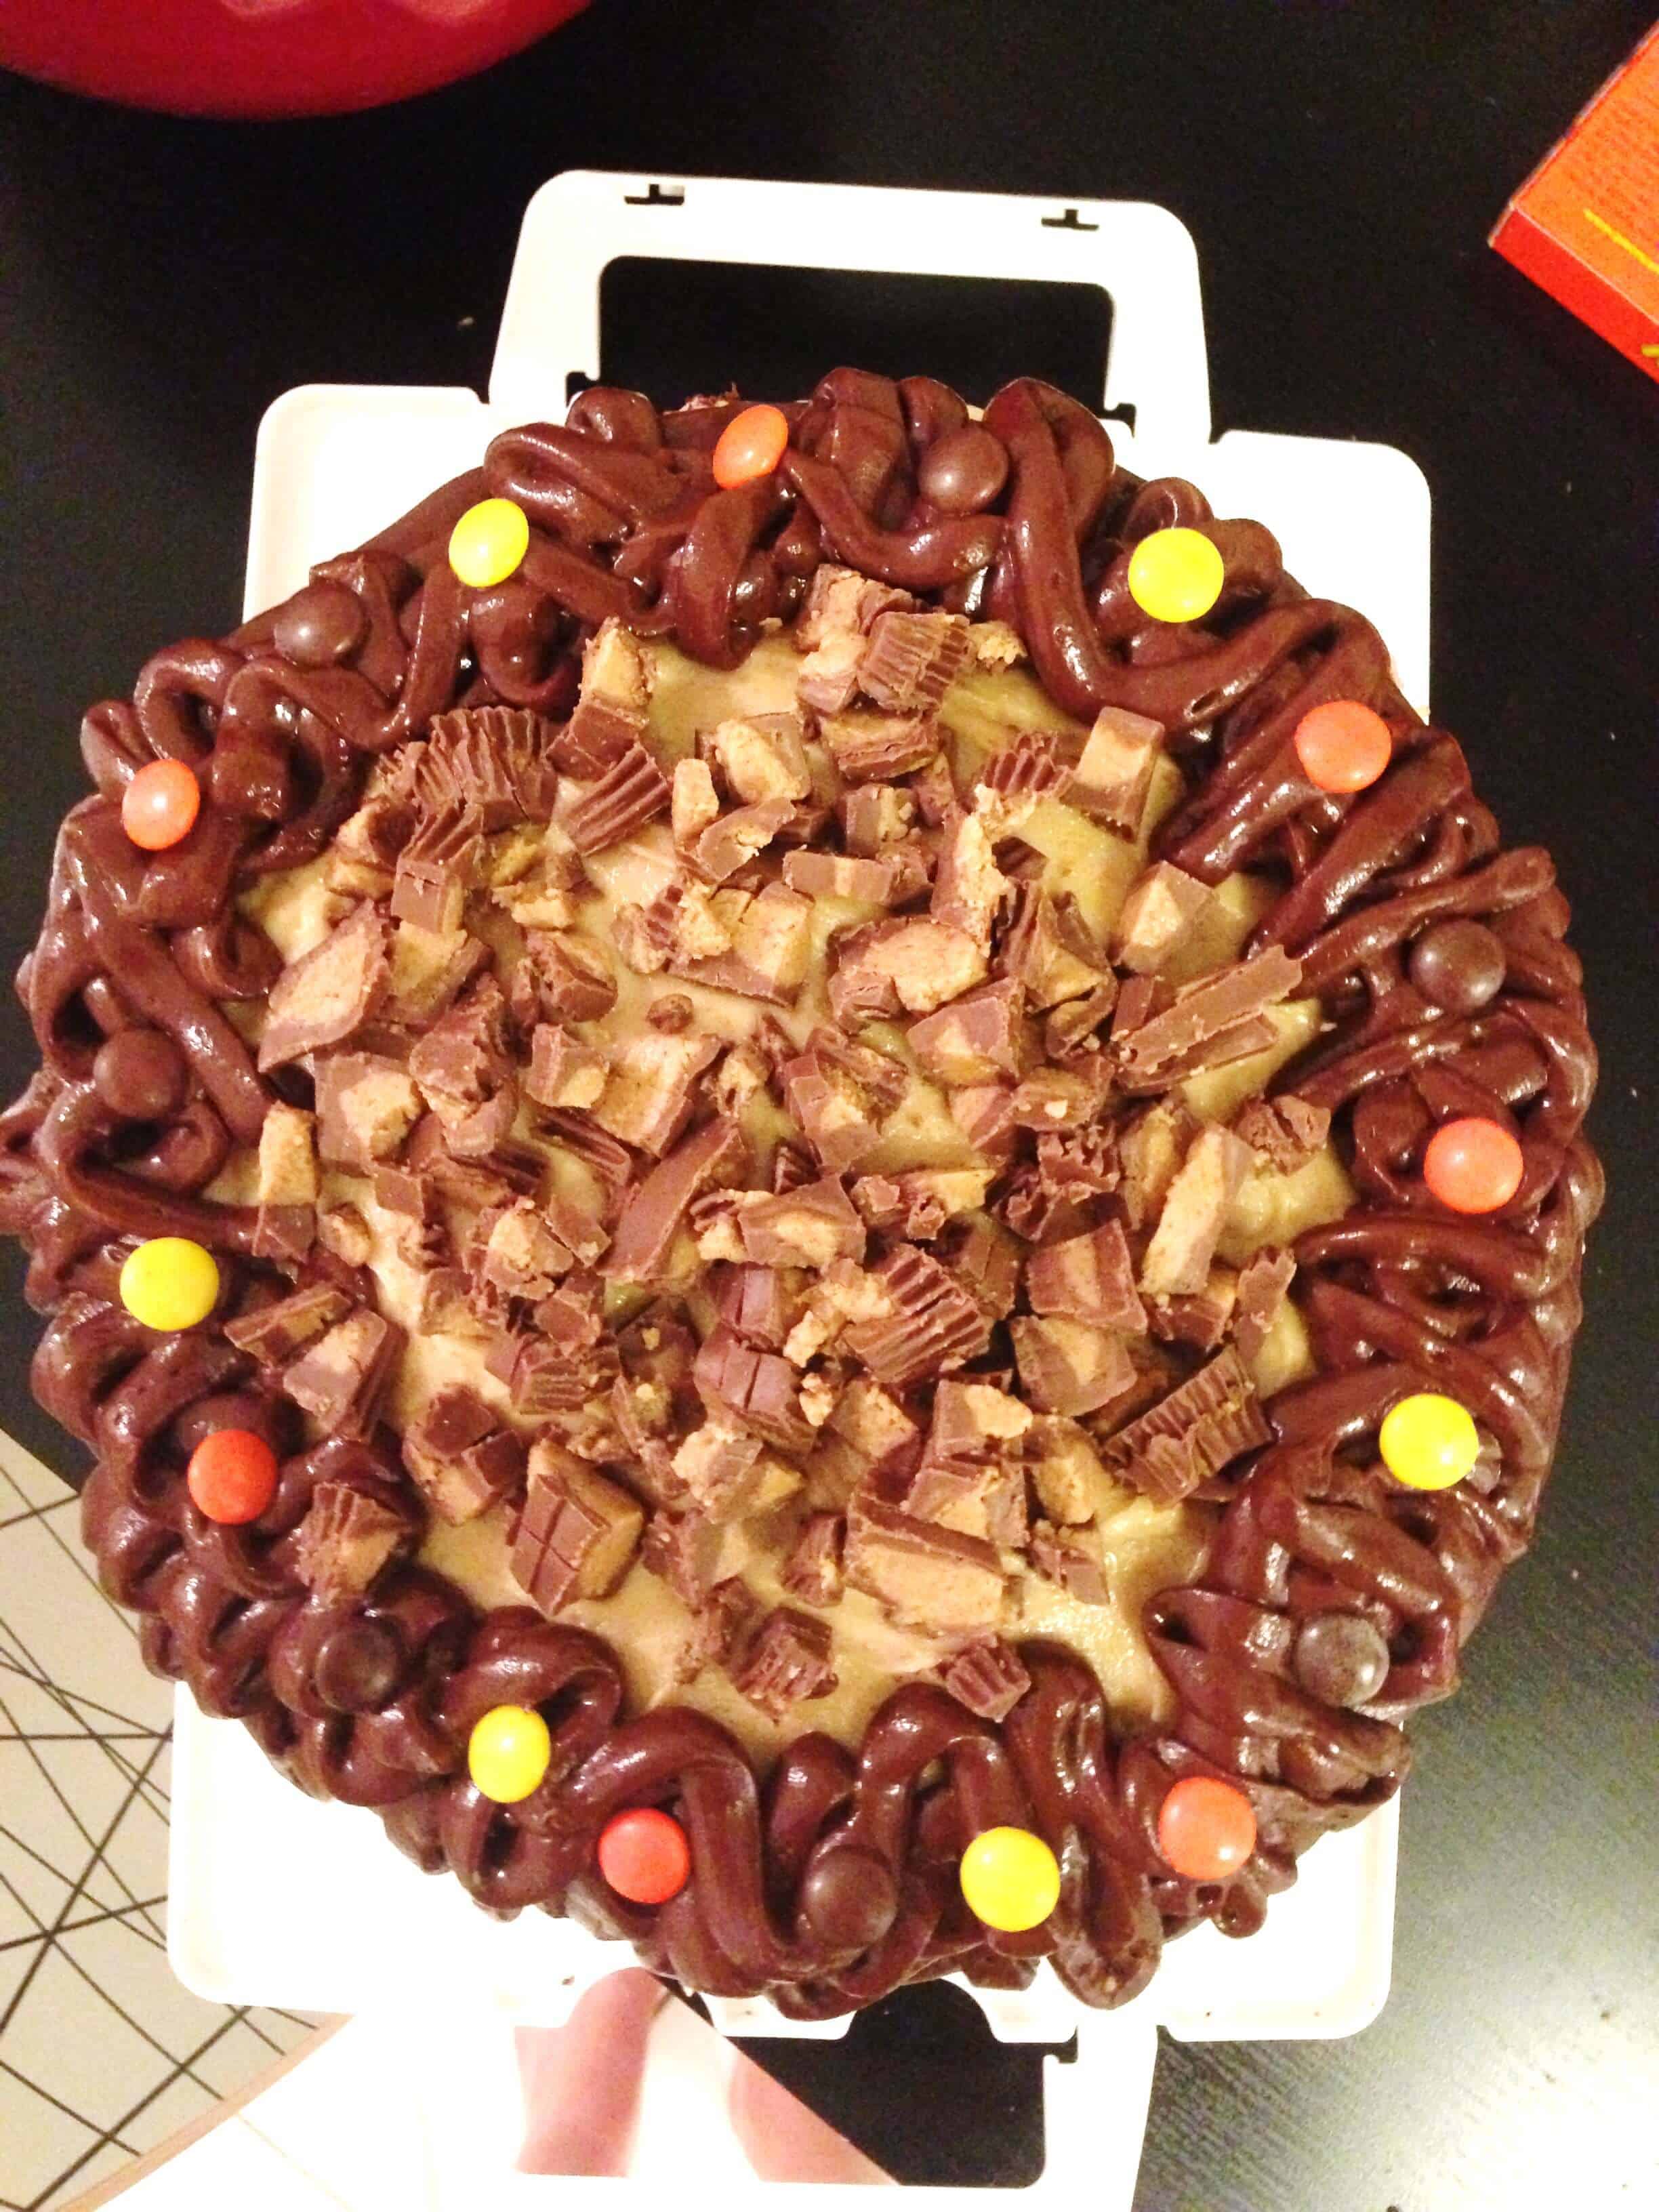 image of a reese's peanut butter cup cake that's topped with peanut butter cups and reese's pieces
